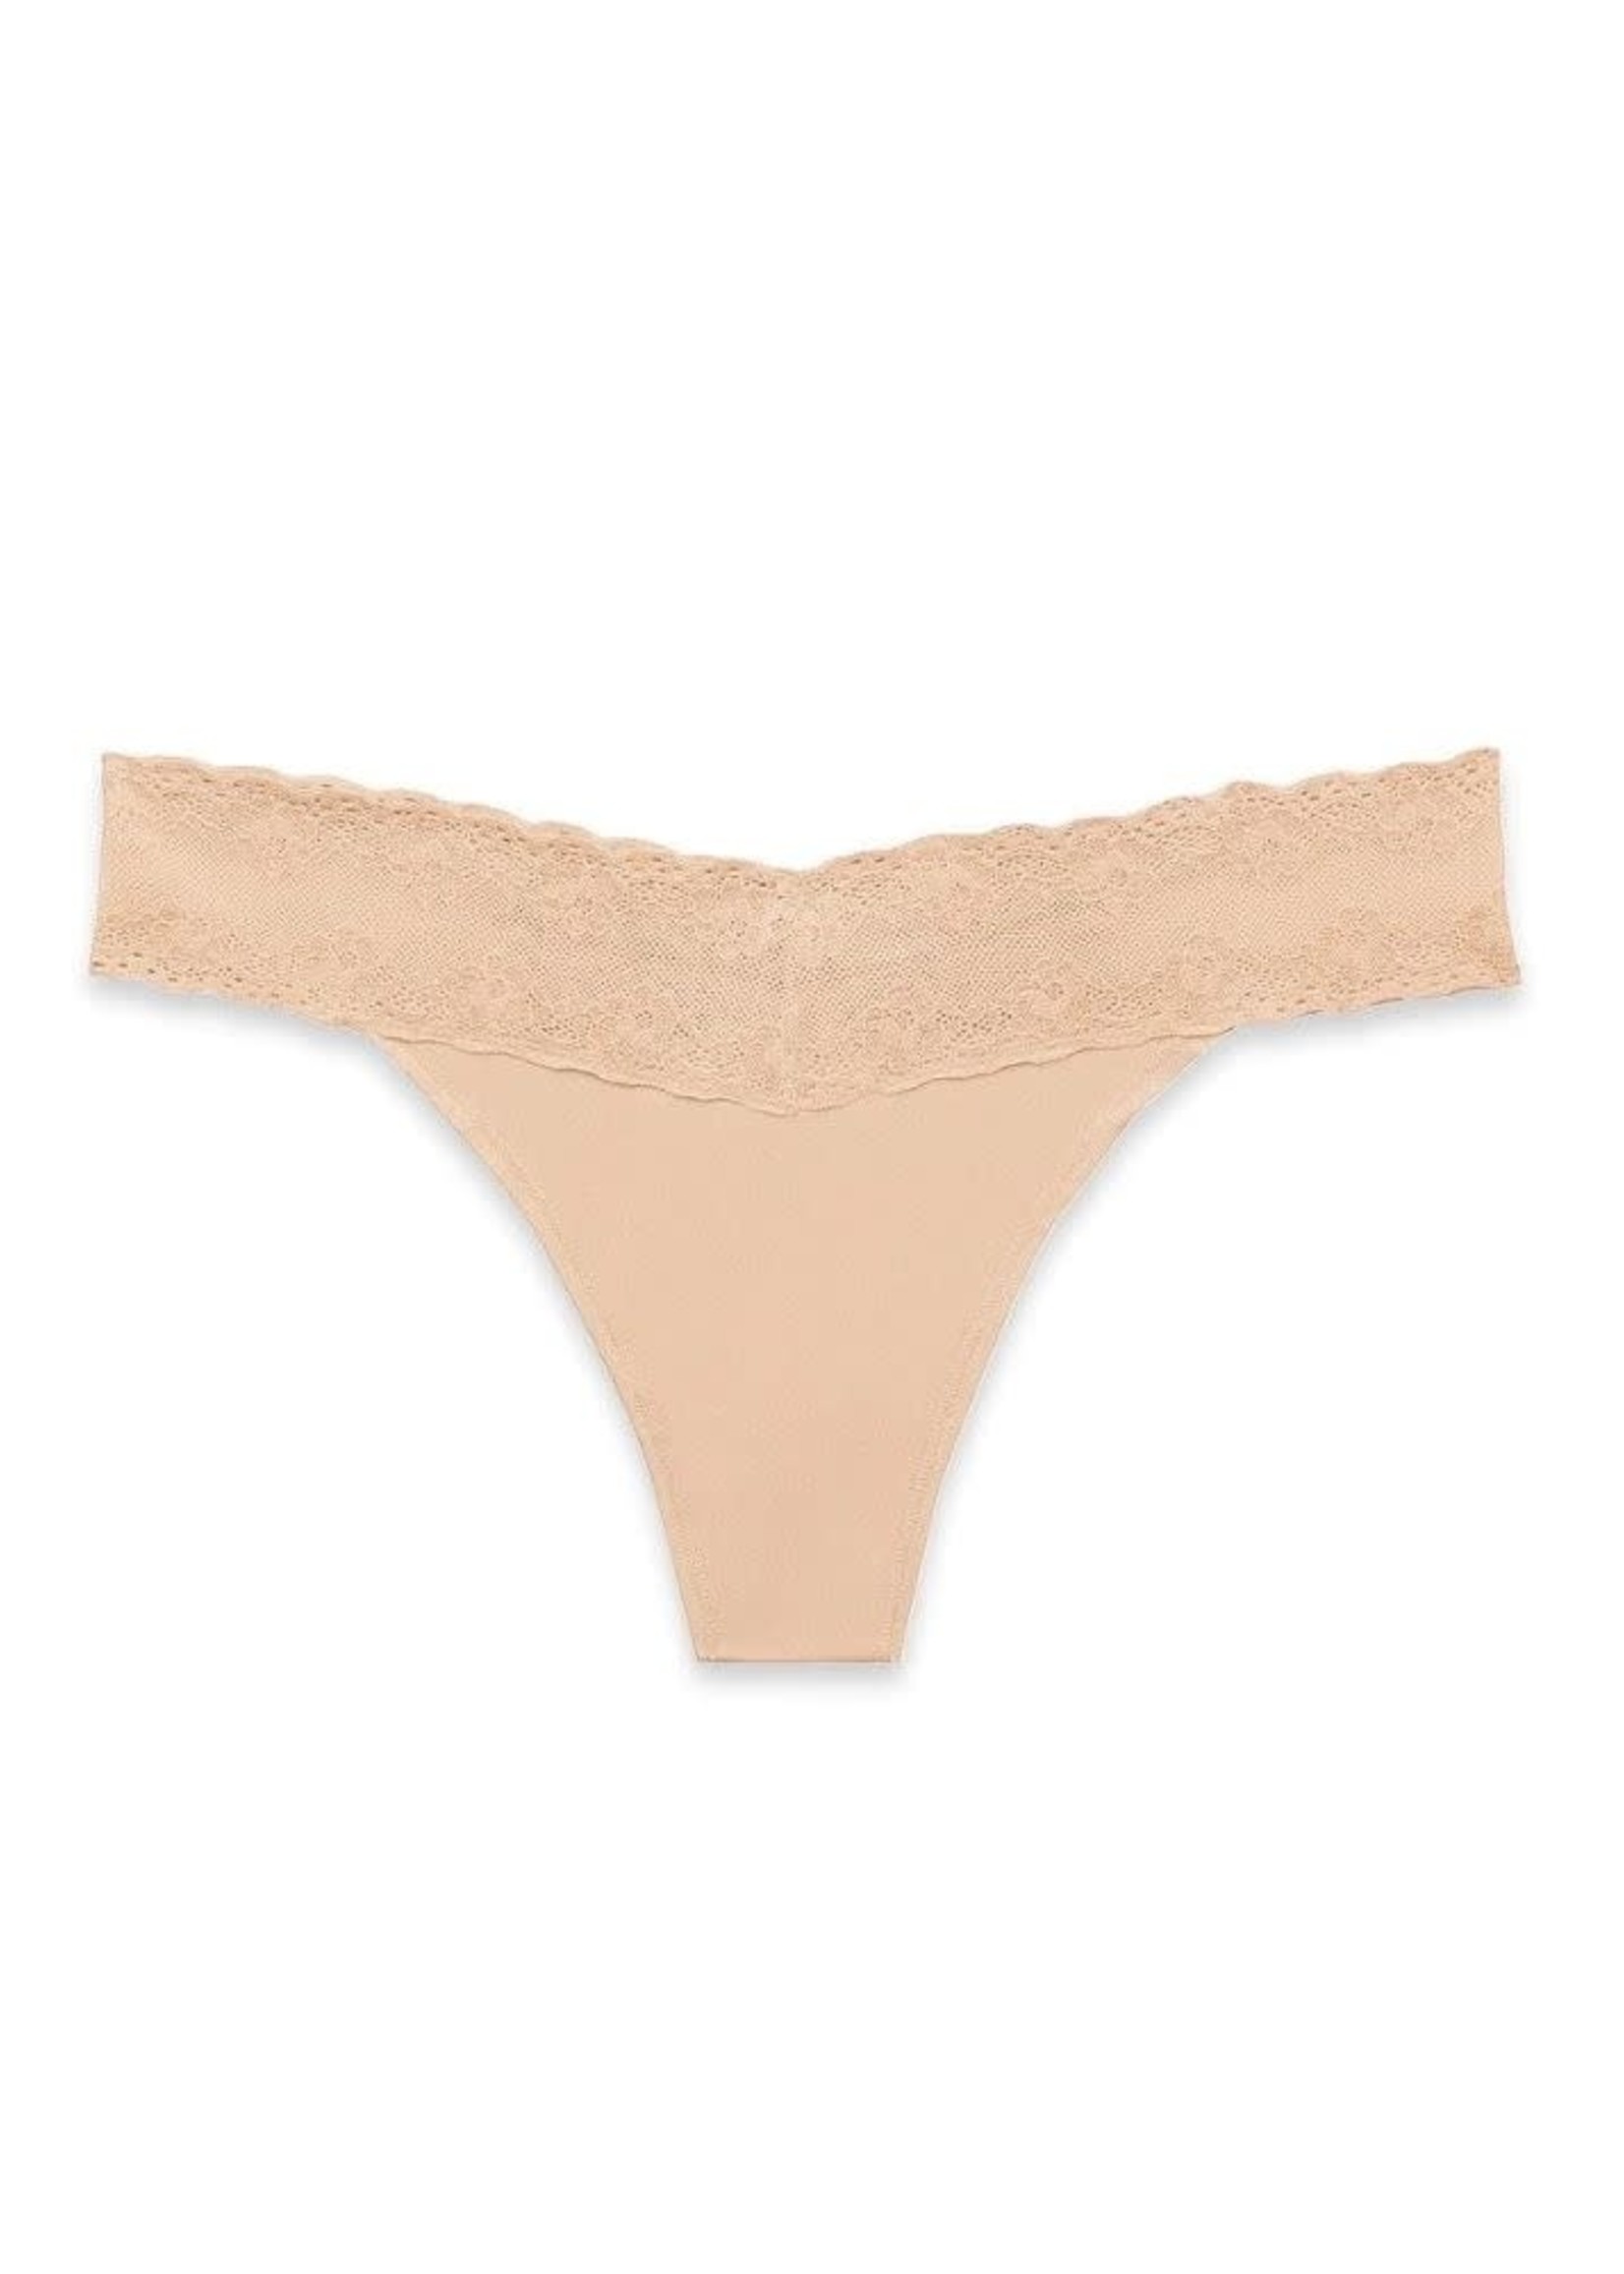 Natori Bliss Perfection One-Size Thong - Cafe